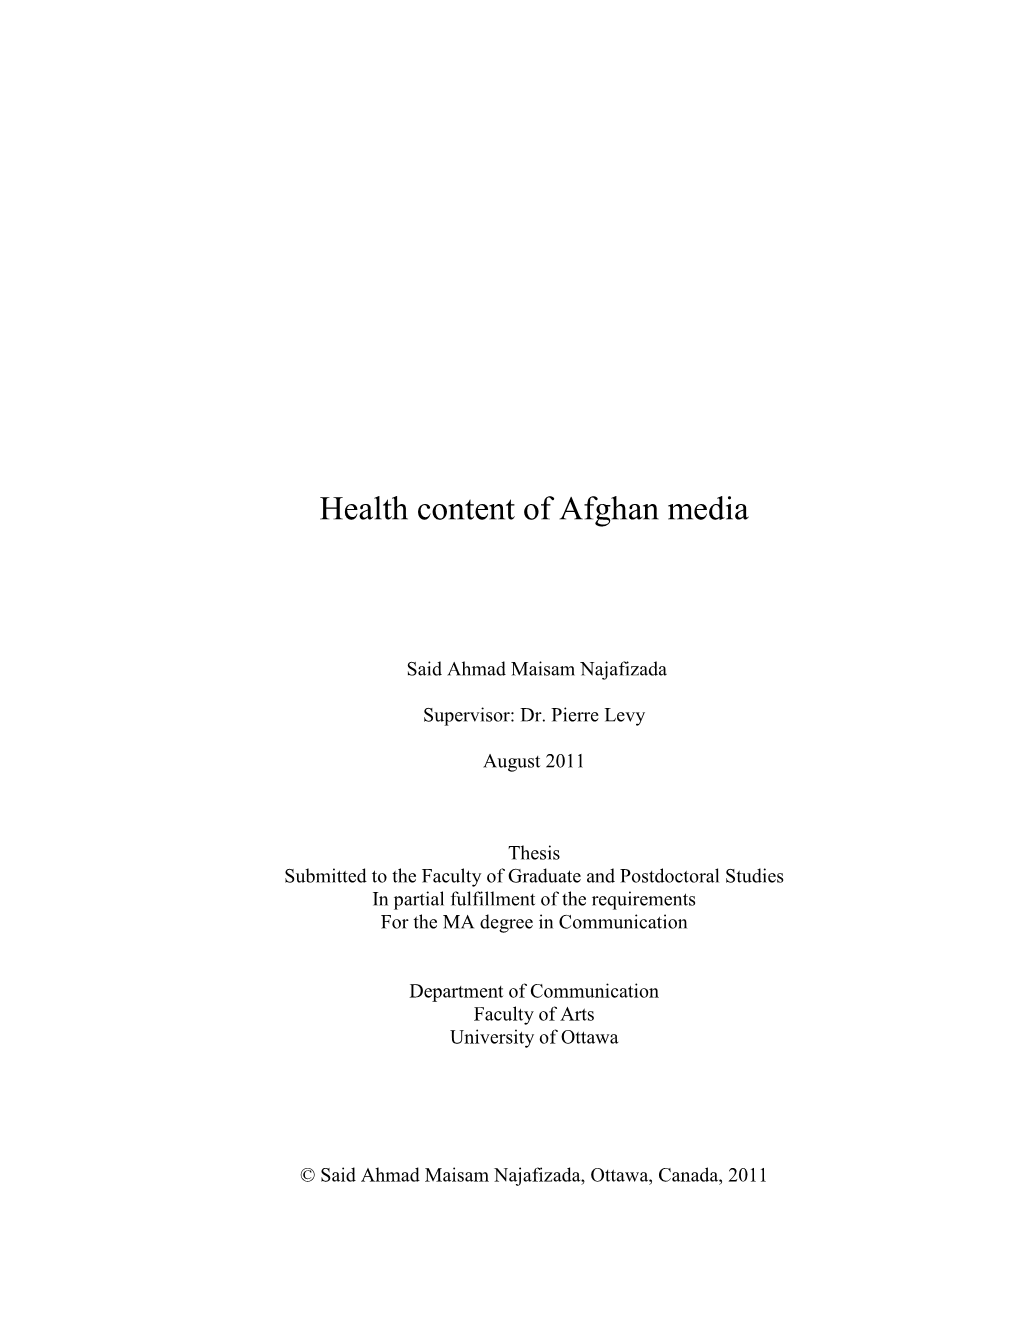 Health Content of Afghan Media